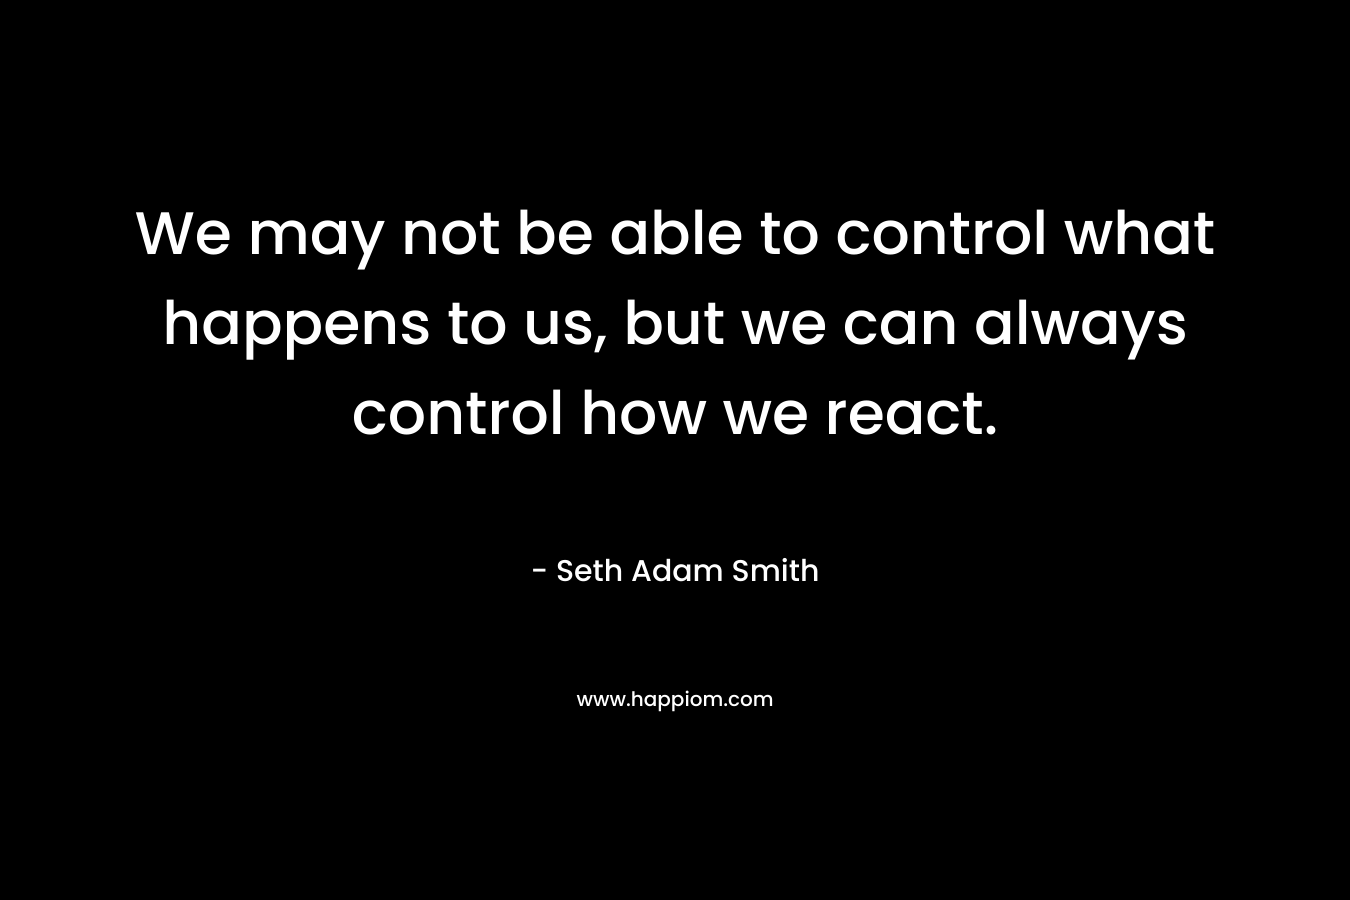 We may not be able to control what happens to us, but we can always control how we react.